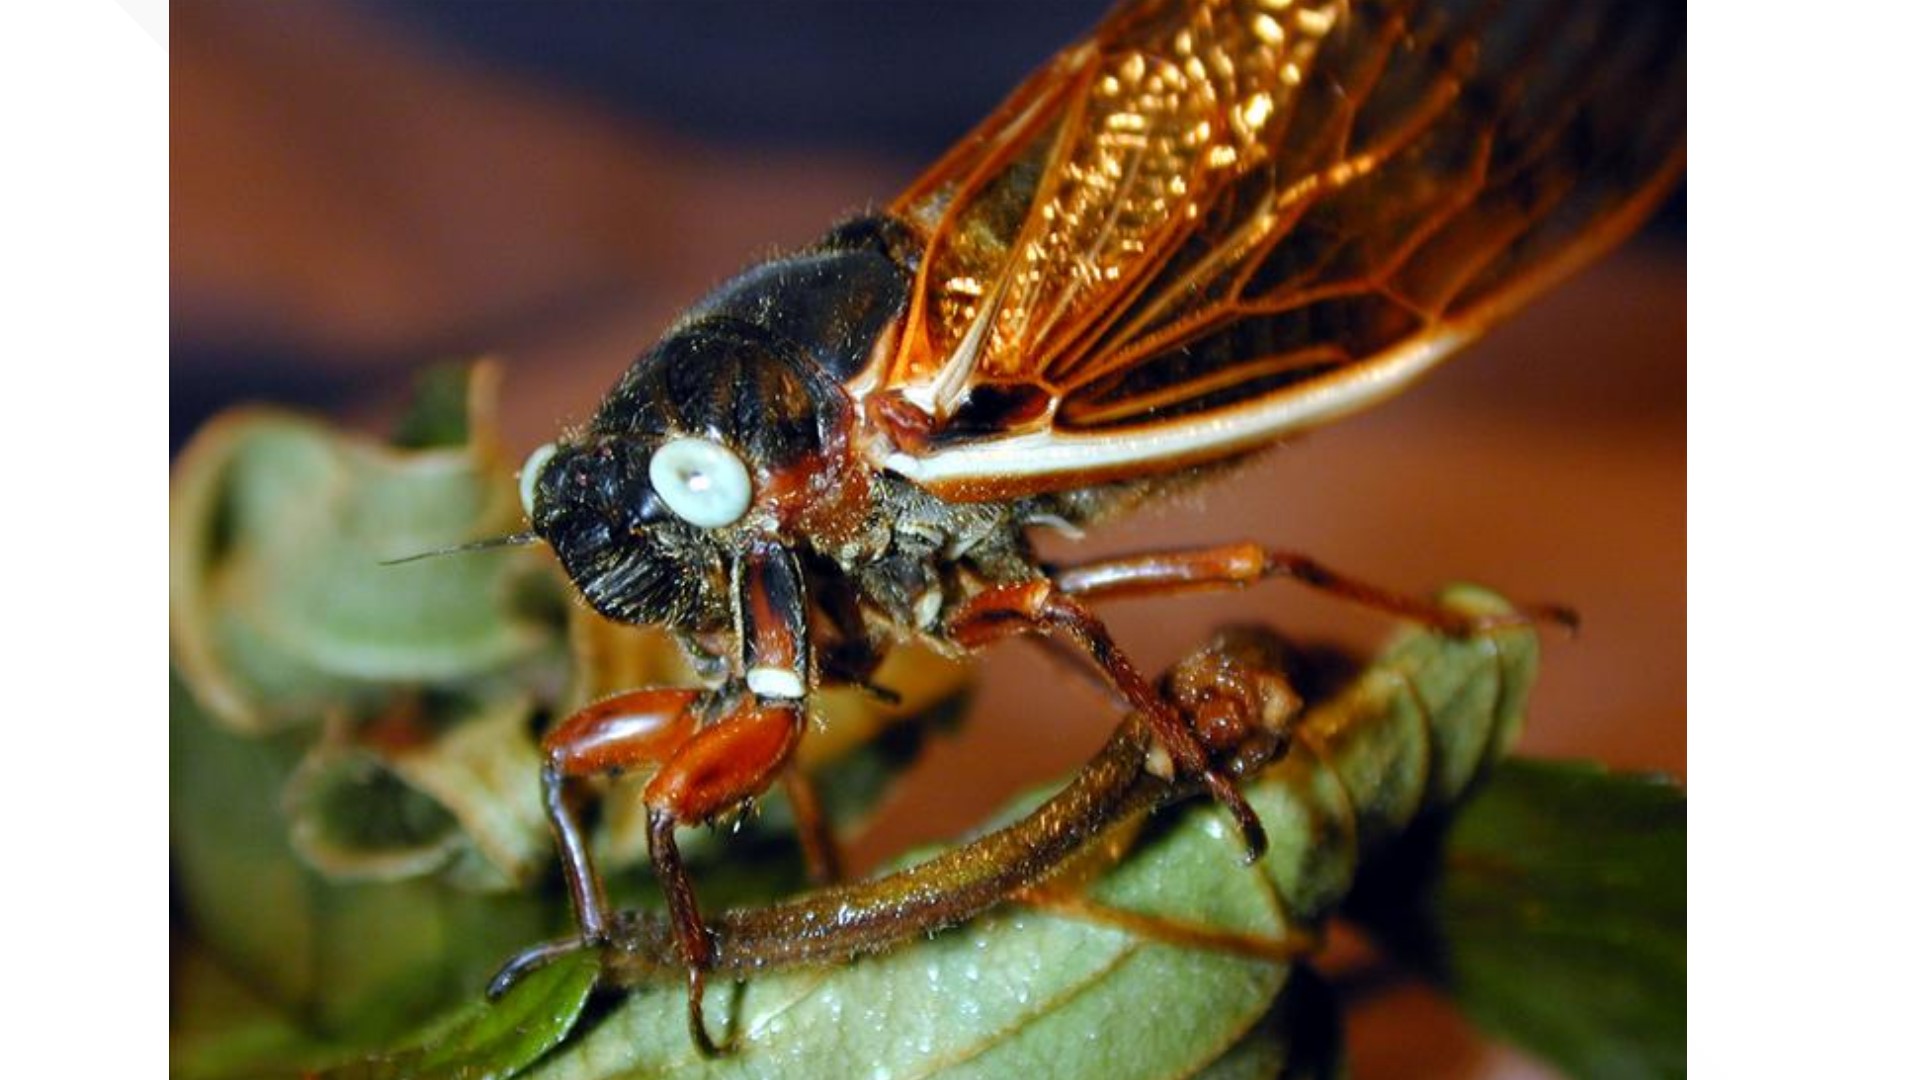 The VERIFY Team looked into a dubious online rumor that a blue-eyed cicada can be worth $1,000. This is false.